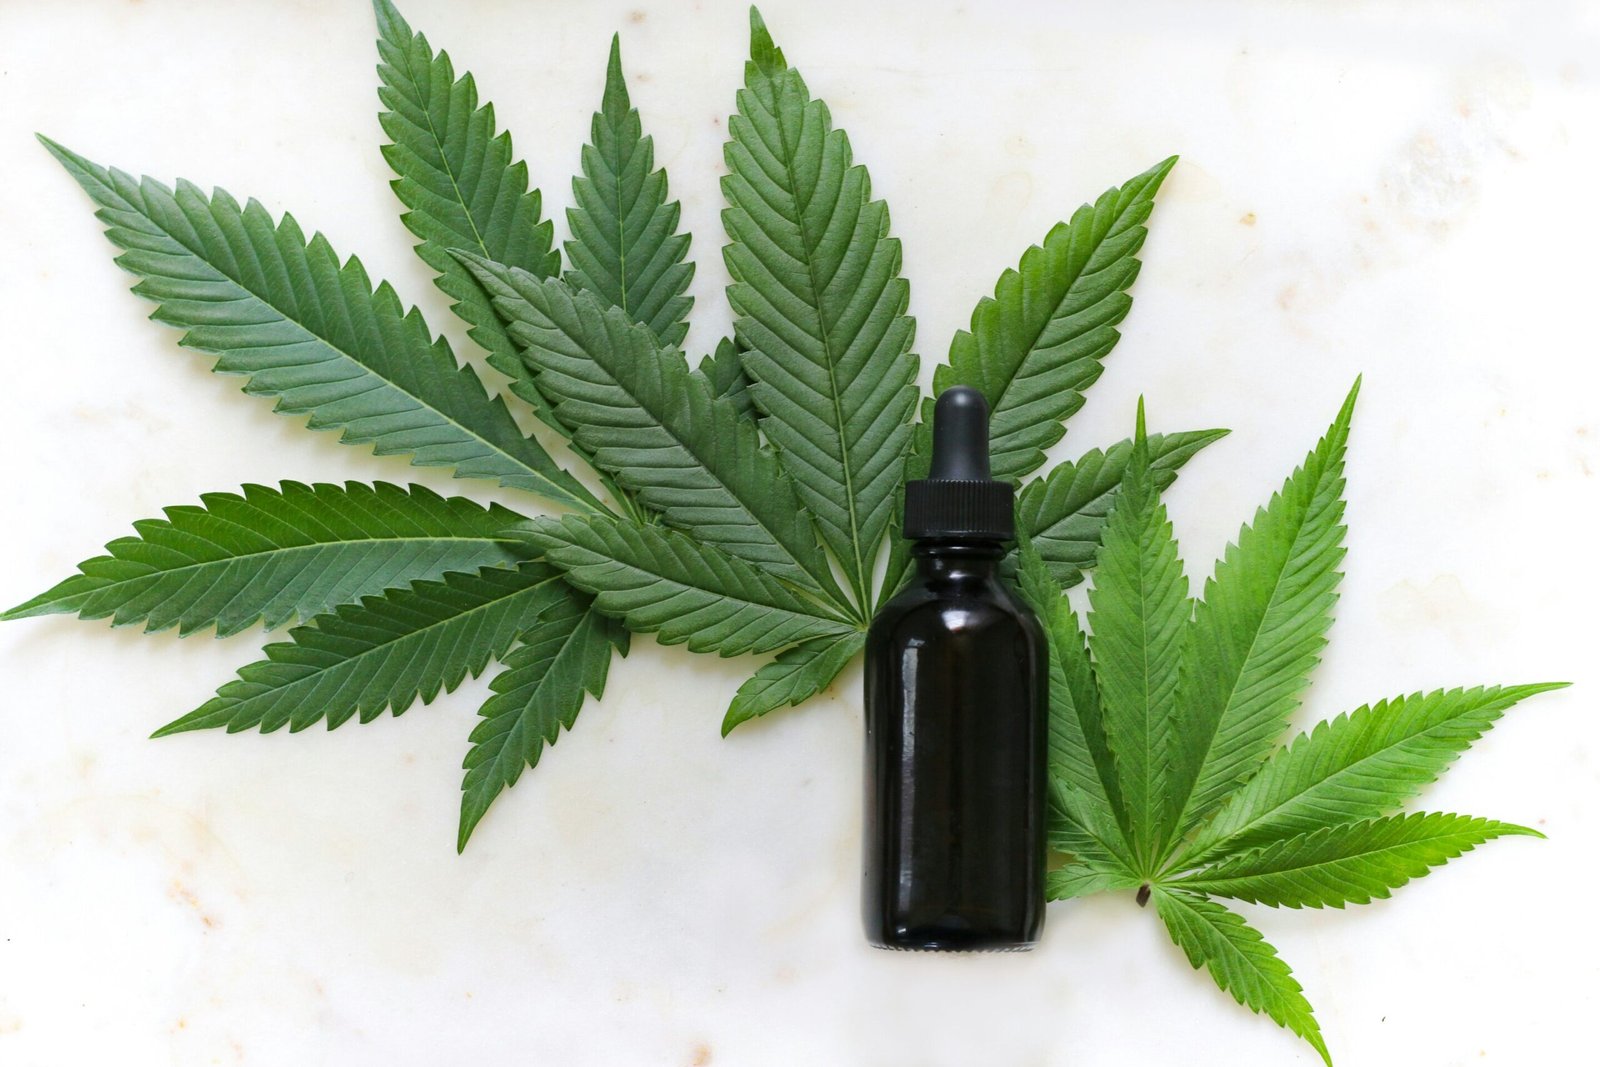 Nearly 3 of healthy adolescents use commercial CBD products study finds